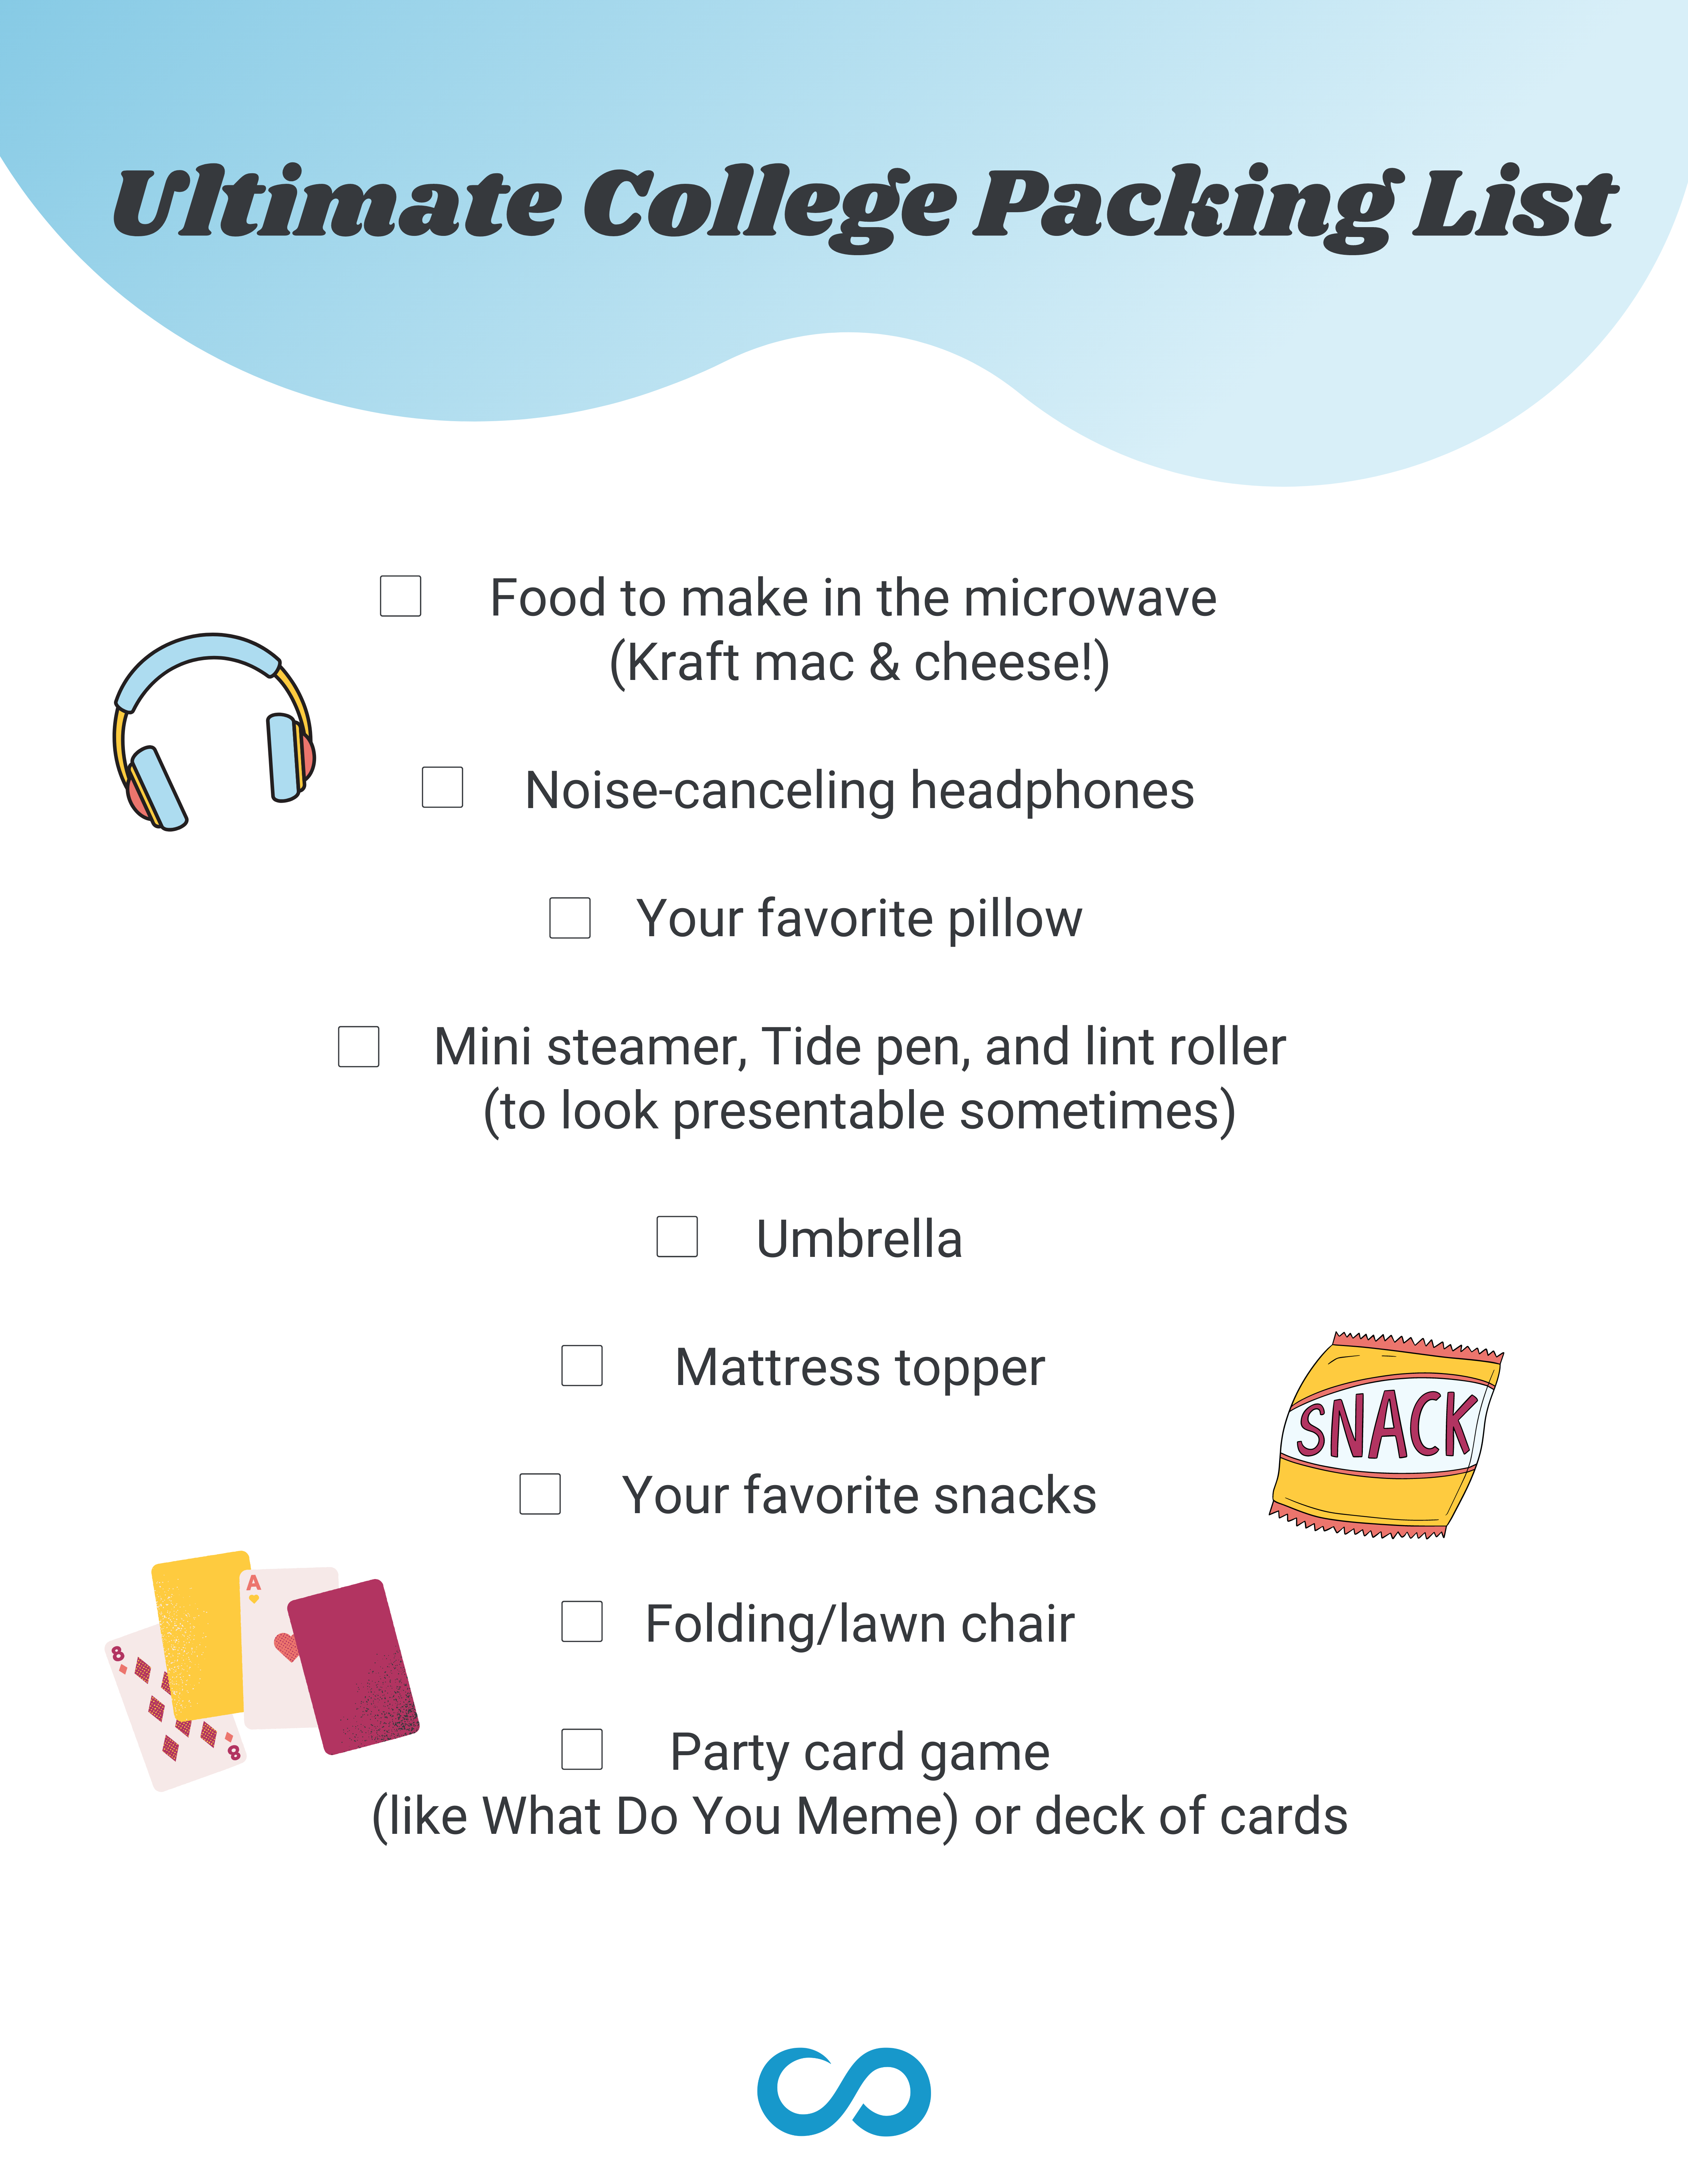 Scoir's Ultimate College Packing List